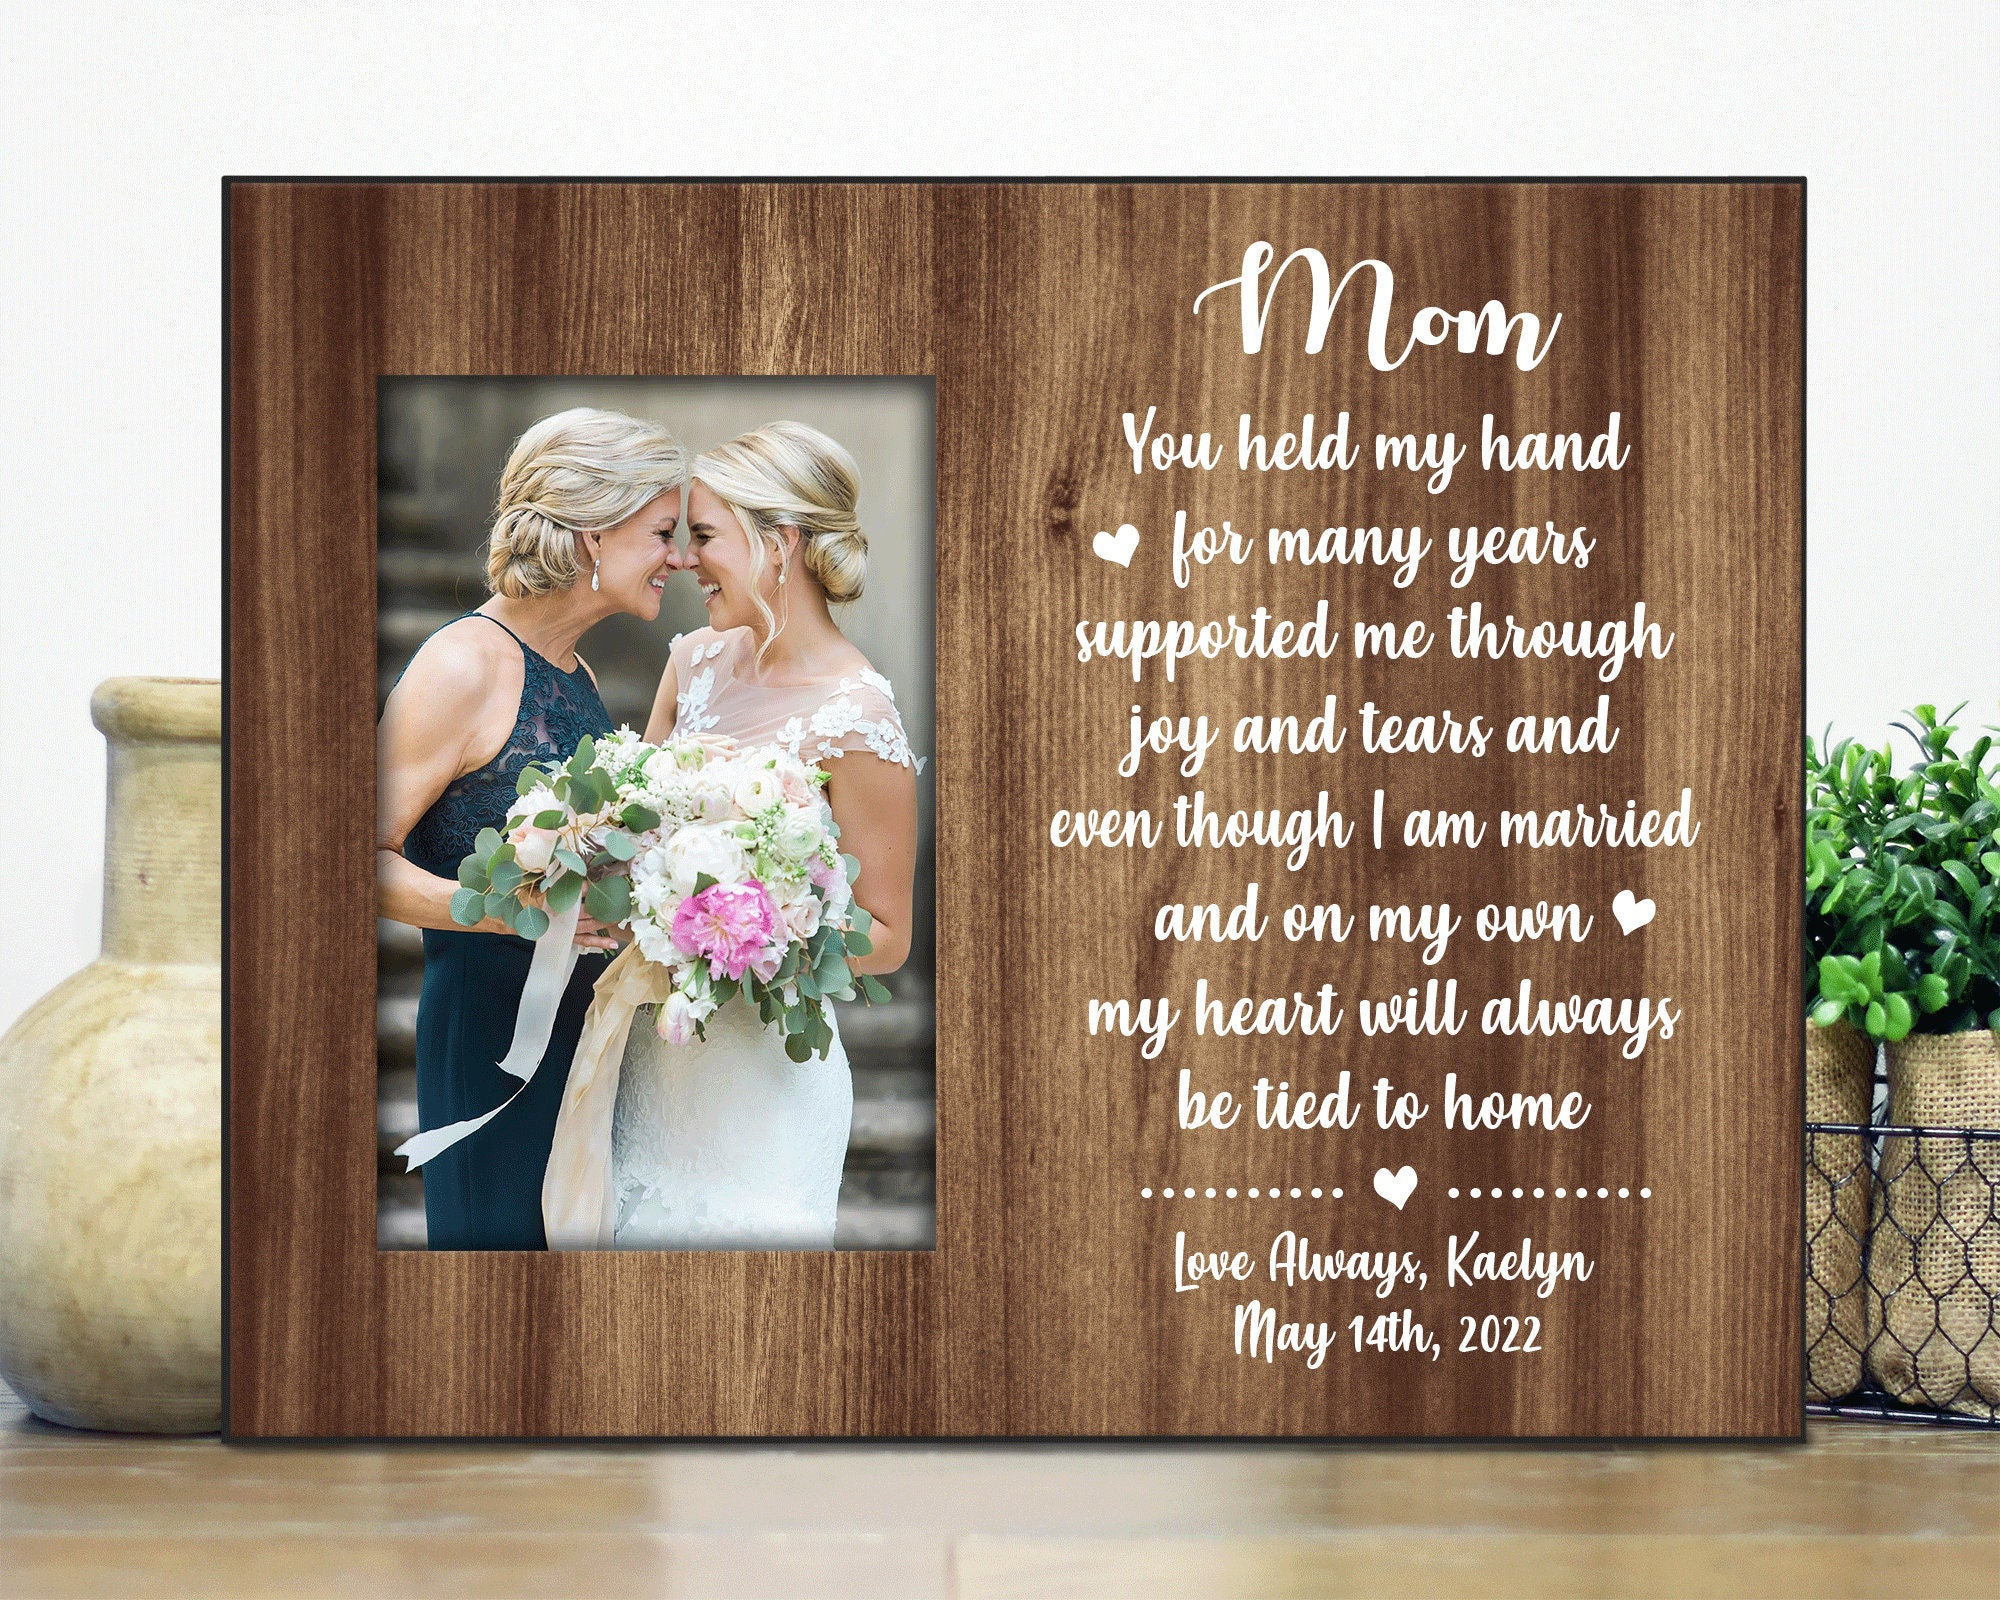 Mothers Day Gifts Mum Mother Daughter Best Friend Mummy & Me Rustic Plaque